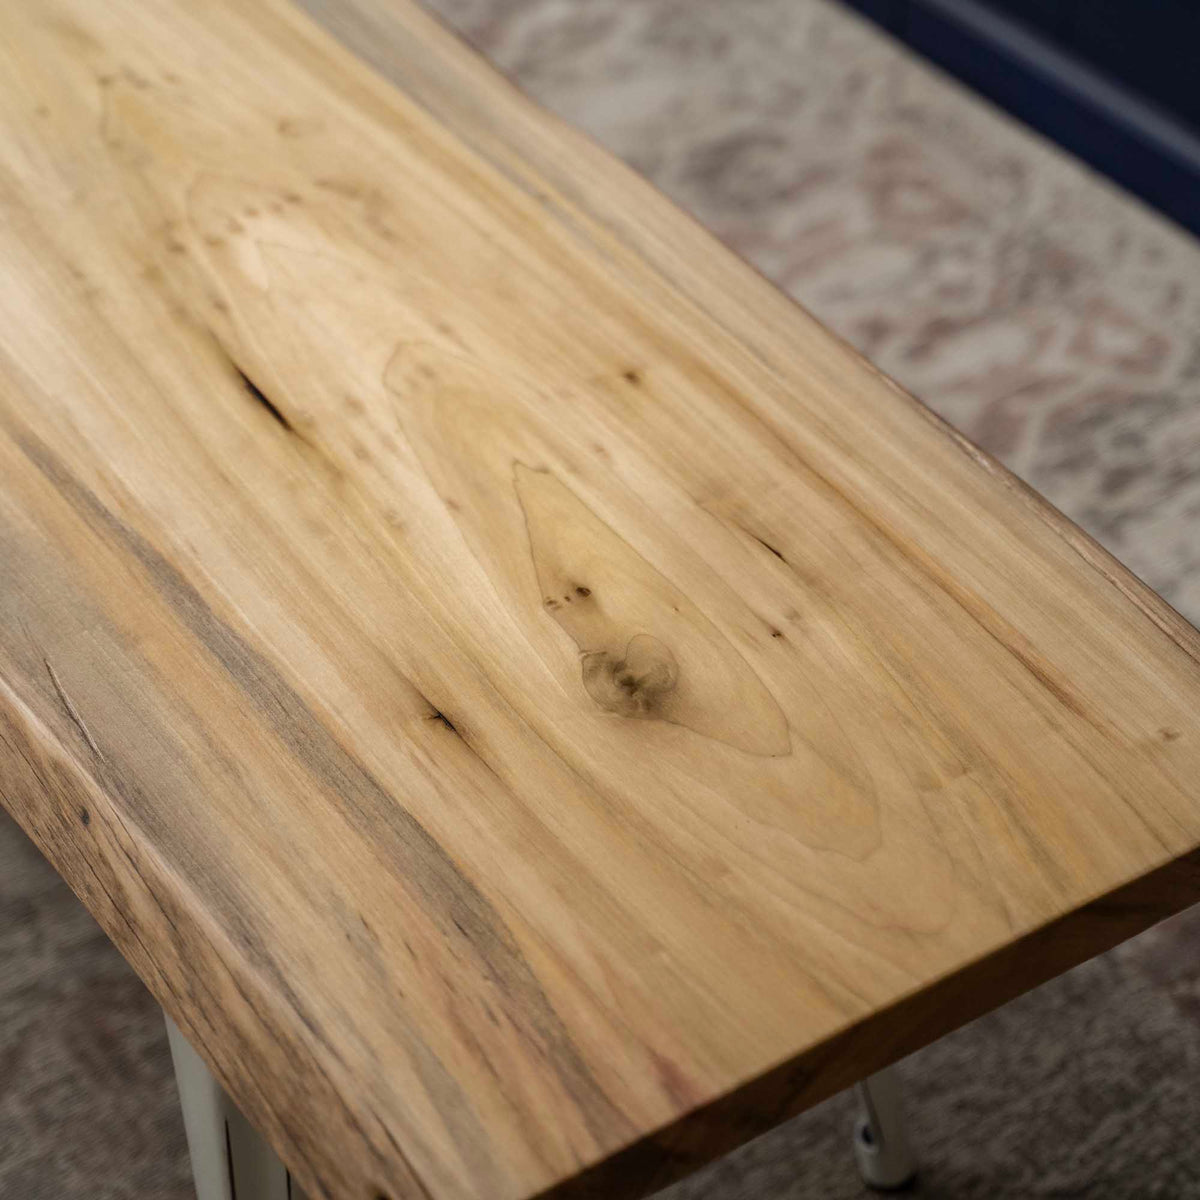 No 8. - 2” Finished Rainbow Poplar Table Top Live Edge Slab Finished Sanded &amp; Oiled Console Coffee Table Desk Top Ready